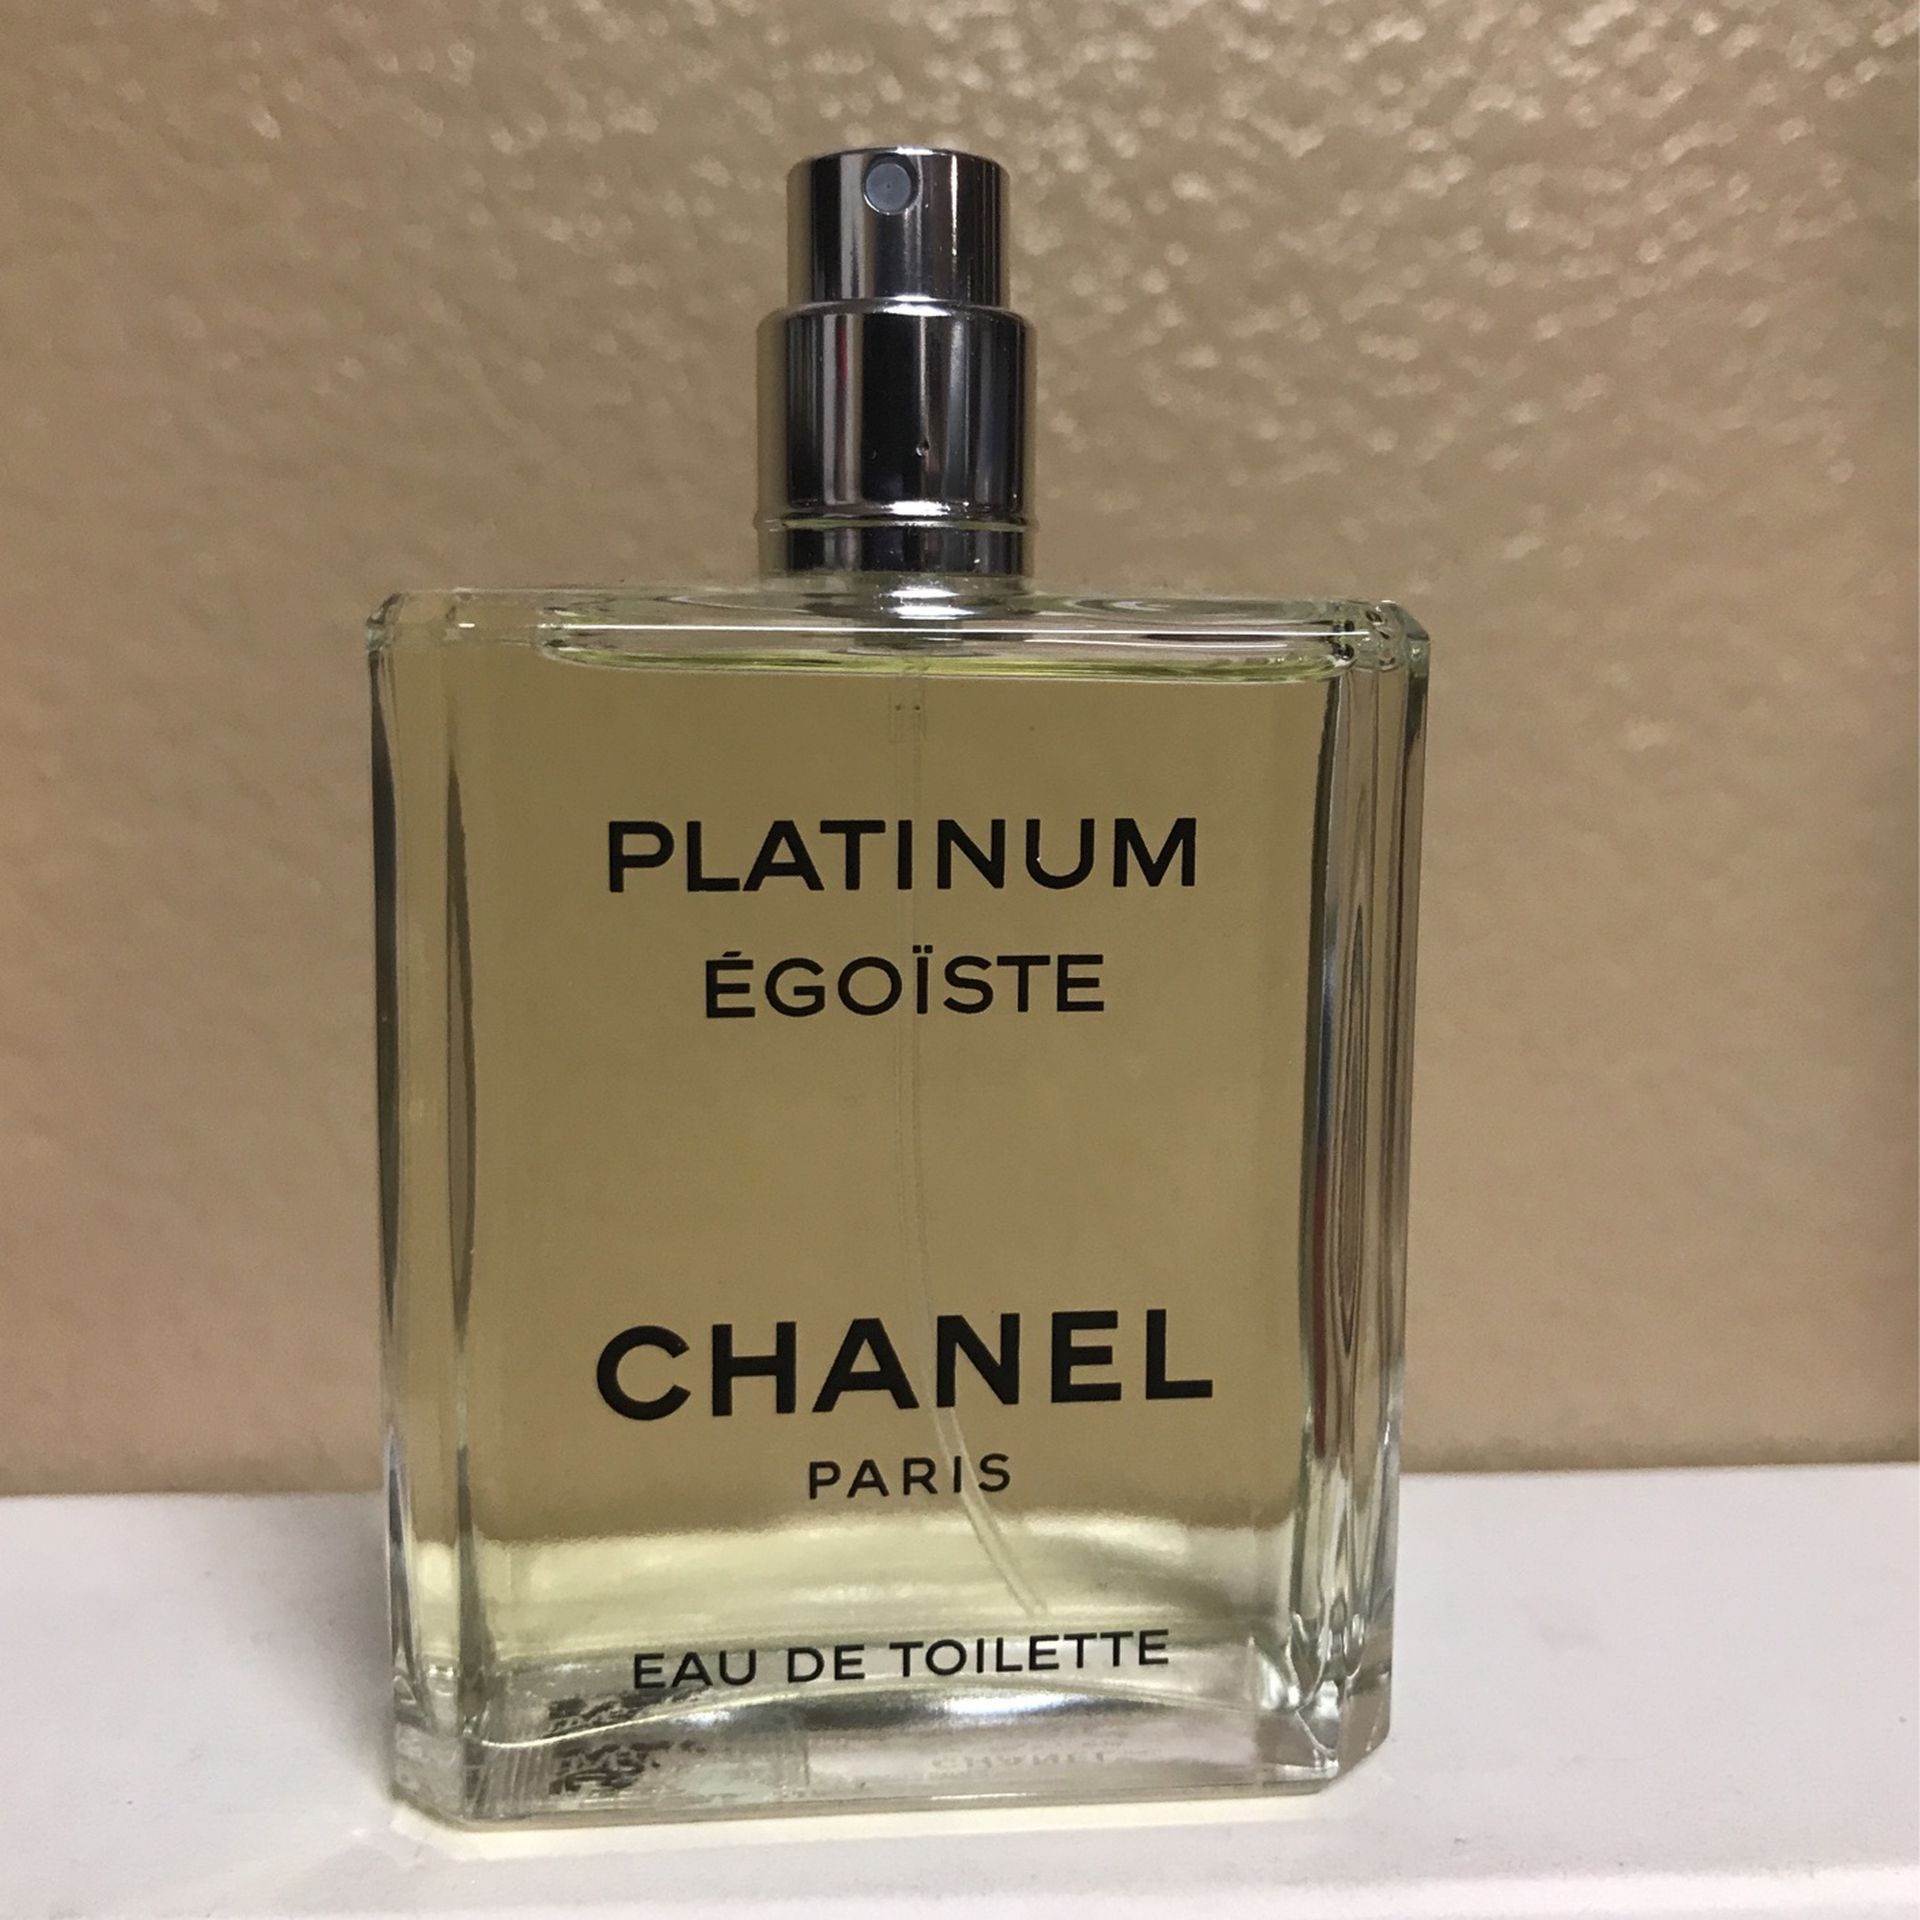 Chanel Platinum Egoiste 100ml Mens Cologne for Sale in Rancho Cucamonga, CA  - OfferUp